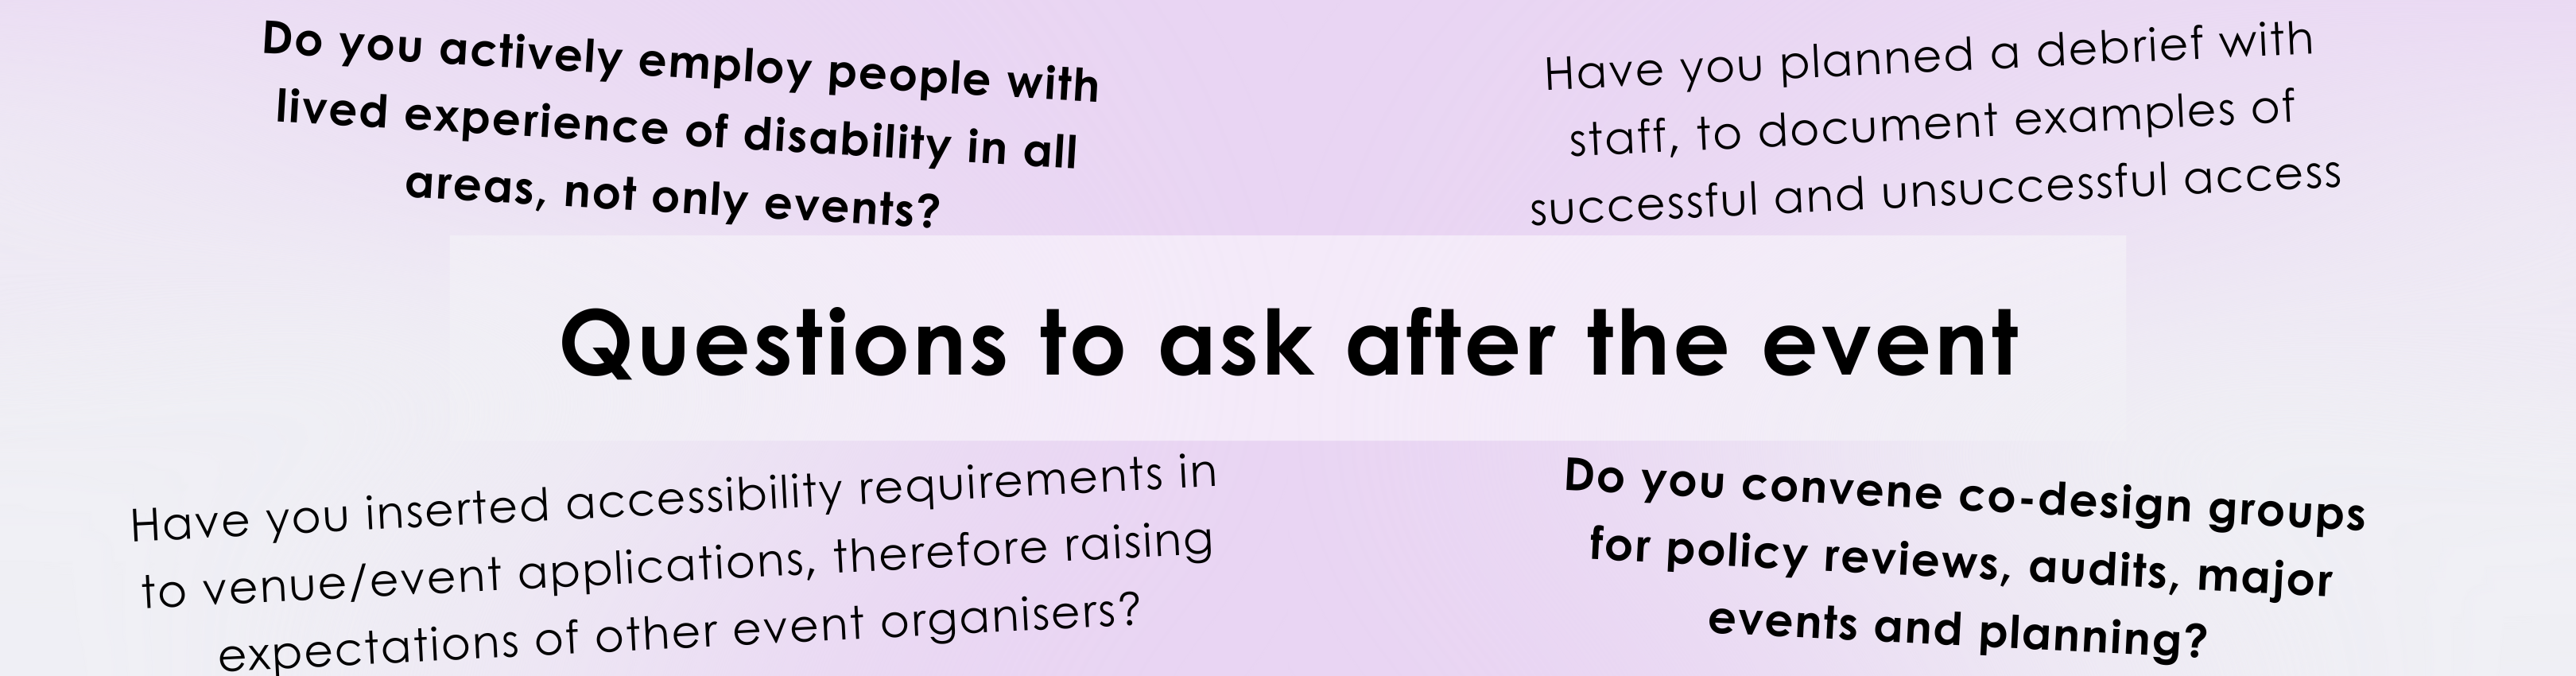 A light purple background with gradient white bottom corners. A transparent white box with text "questions to ask after the event", with 4 questions listed surrounding the heading, 2 in bold text and 2 in normal style font.